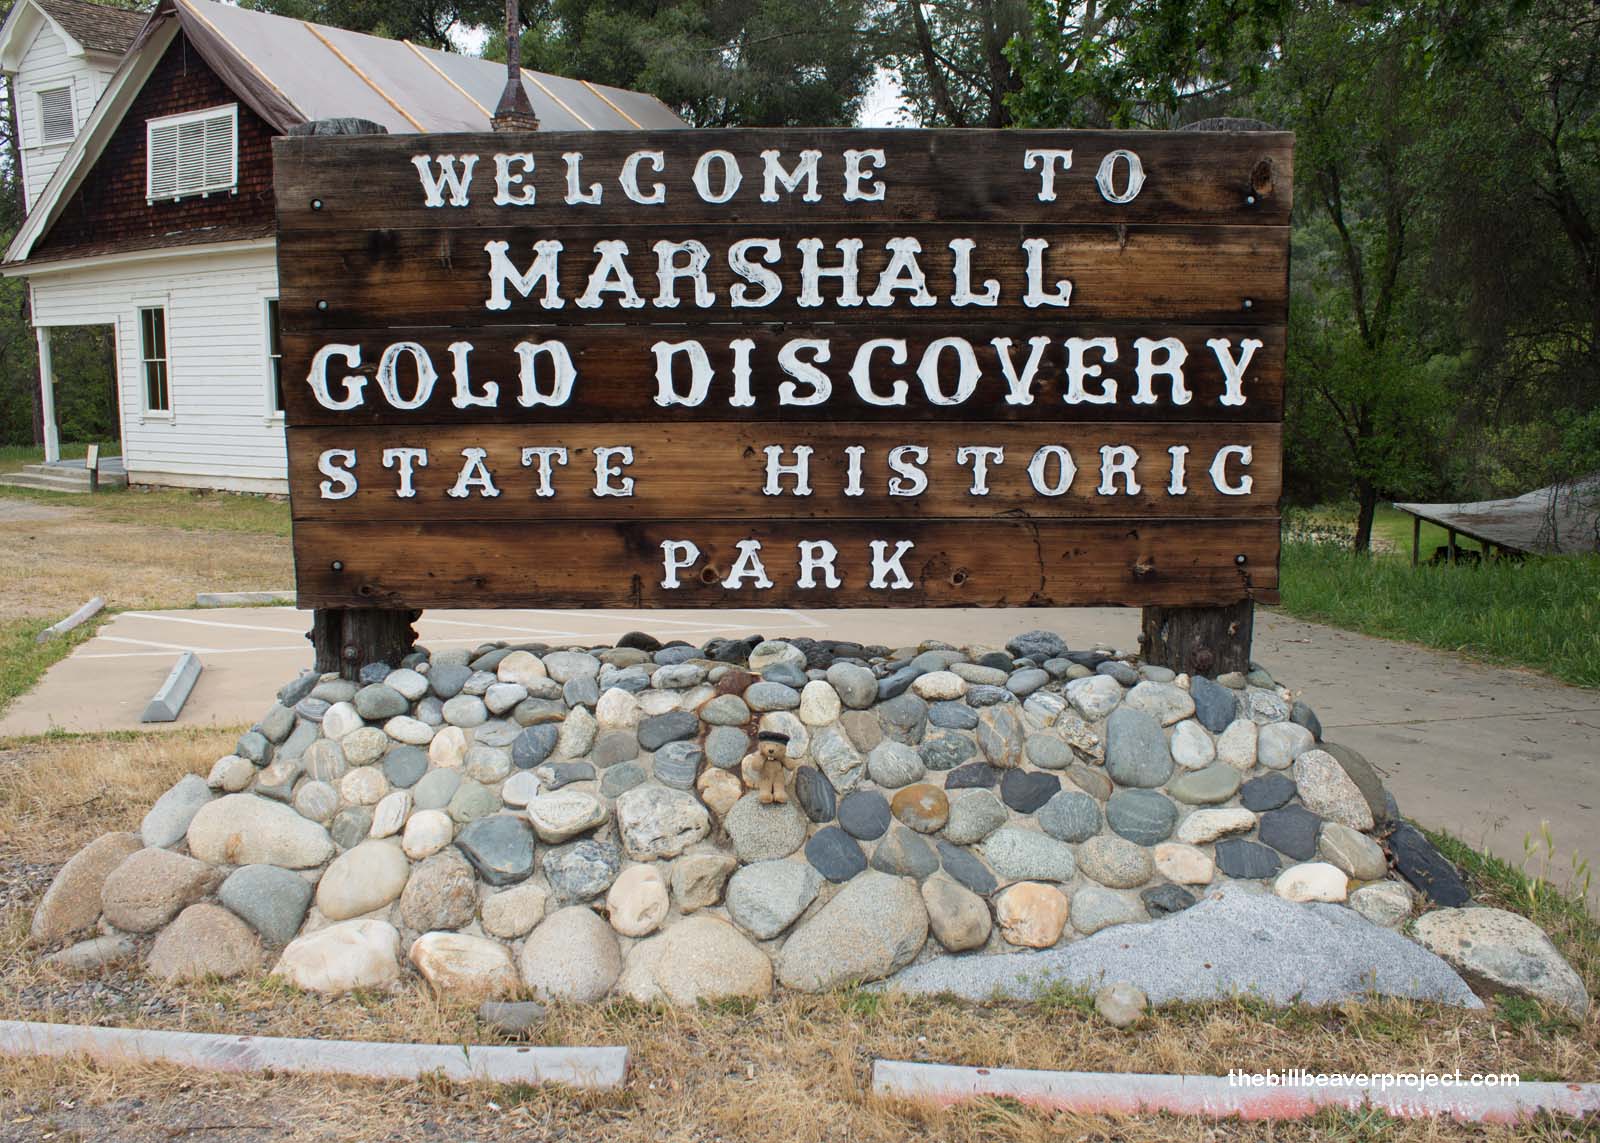 Marshall Gold Discovery Site